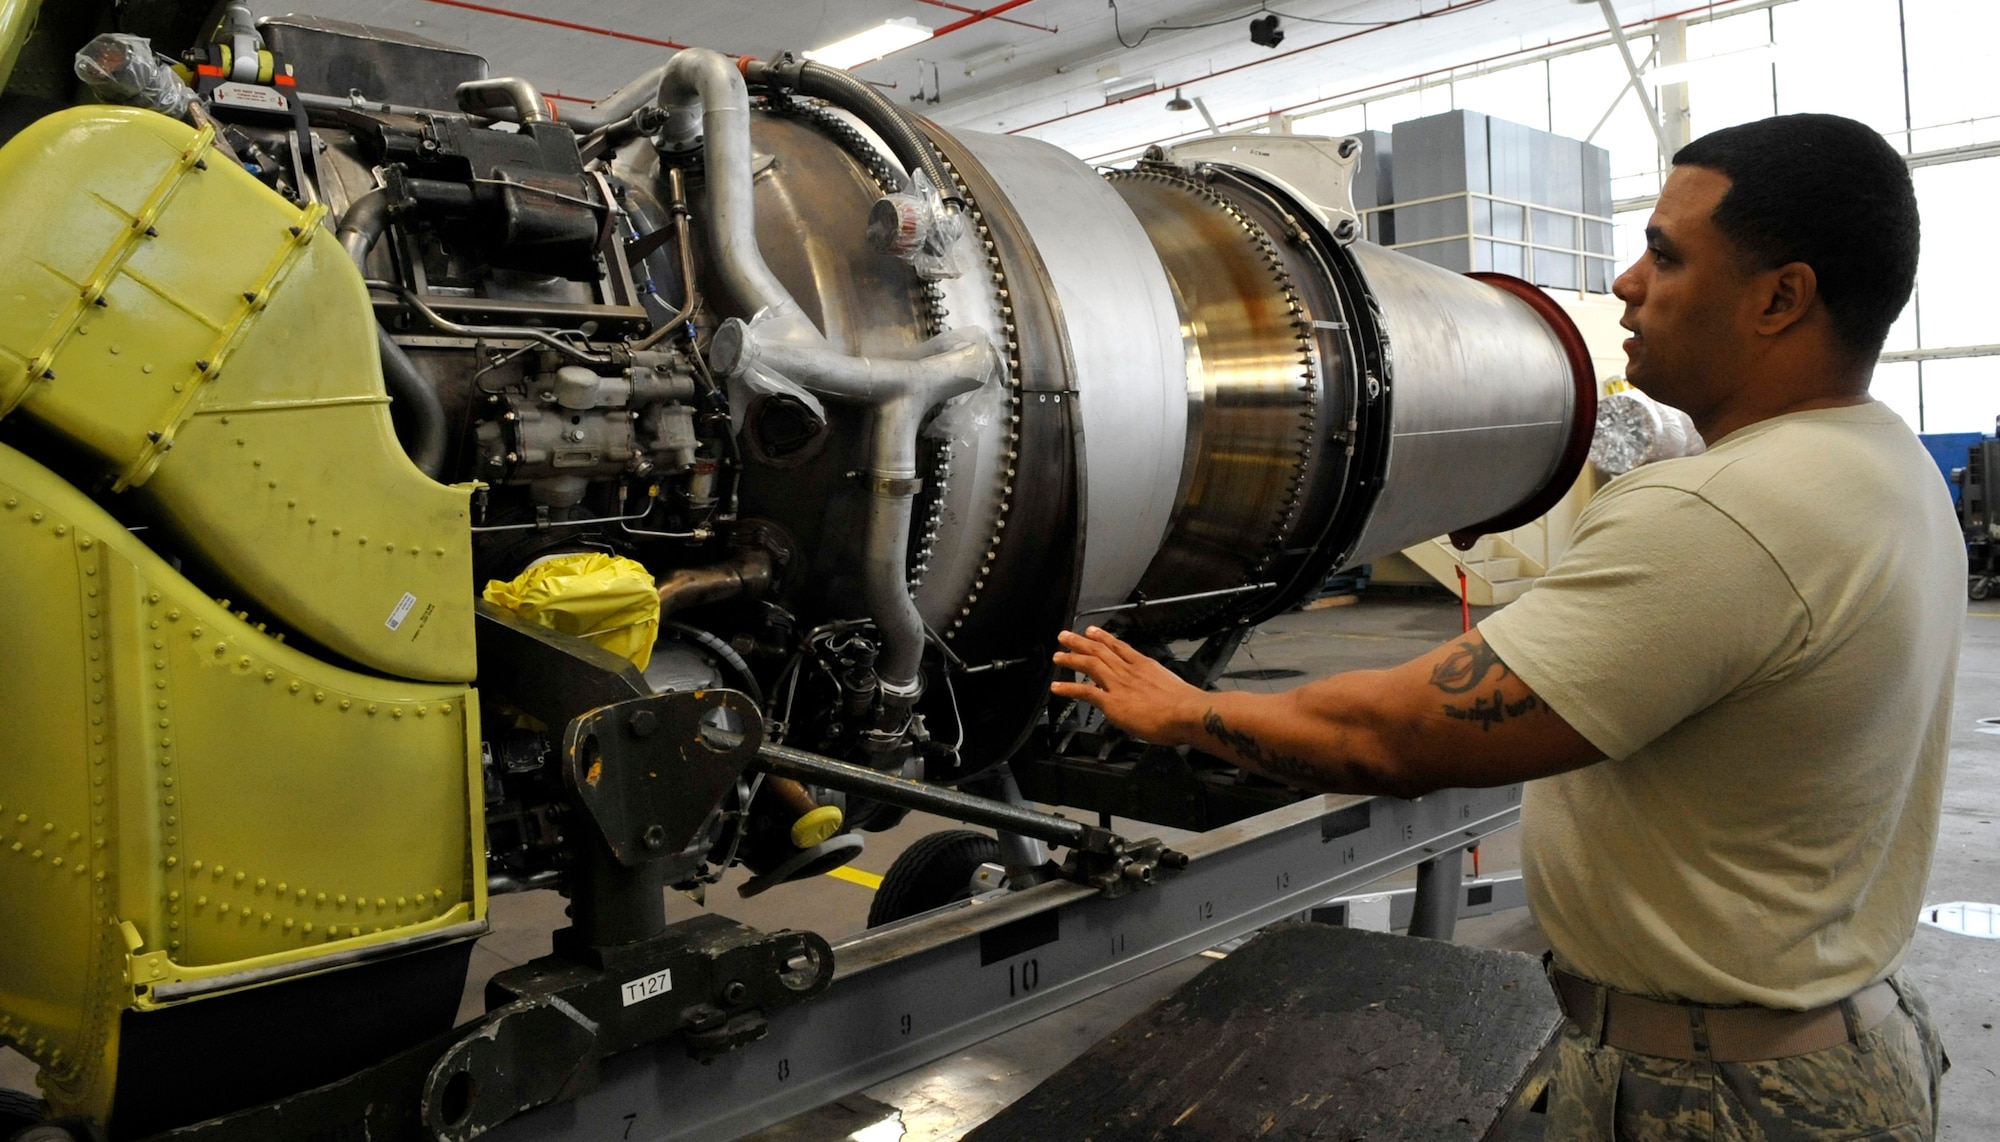 Tech. Sgt. William Cheese, 2nd Maintenance Squadron engine trending and diagnostics monitor, demonstrates how a piece of foreign object debris can enter a B-52H Stratofortress engine and damage its turbines on Barksdale Air Force Base, Oct. 10, 2013. If damage to the engine is great enough, it will be shipped to Tinker Air Force Base, Okla., for an investigation and complete repair. (U.S. Air Force Photo/Airman 1st Class Benjamin Raughton)